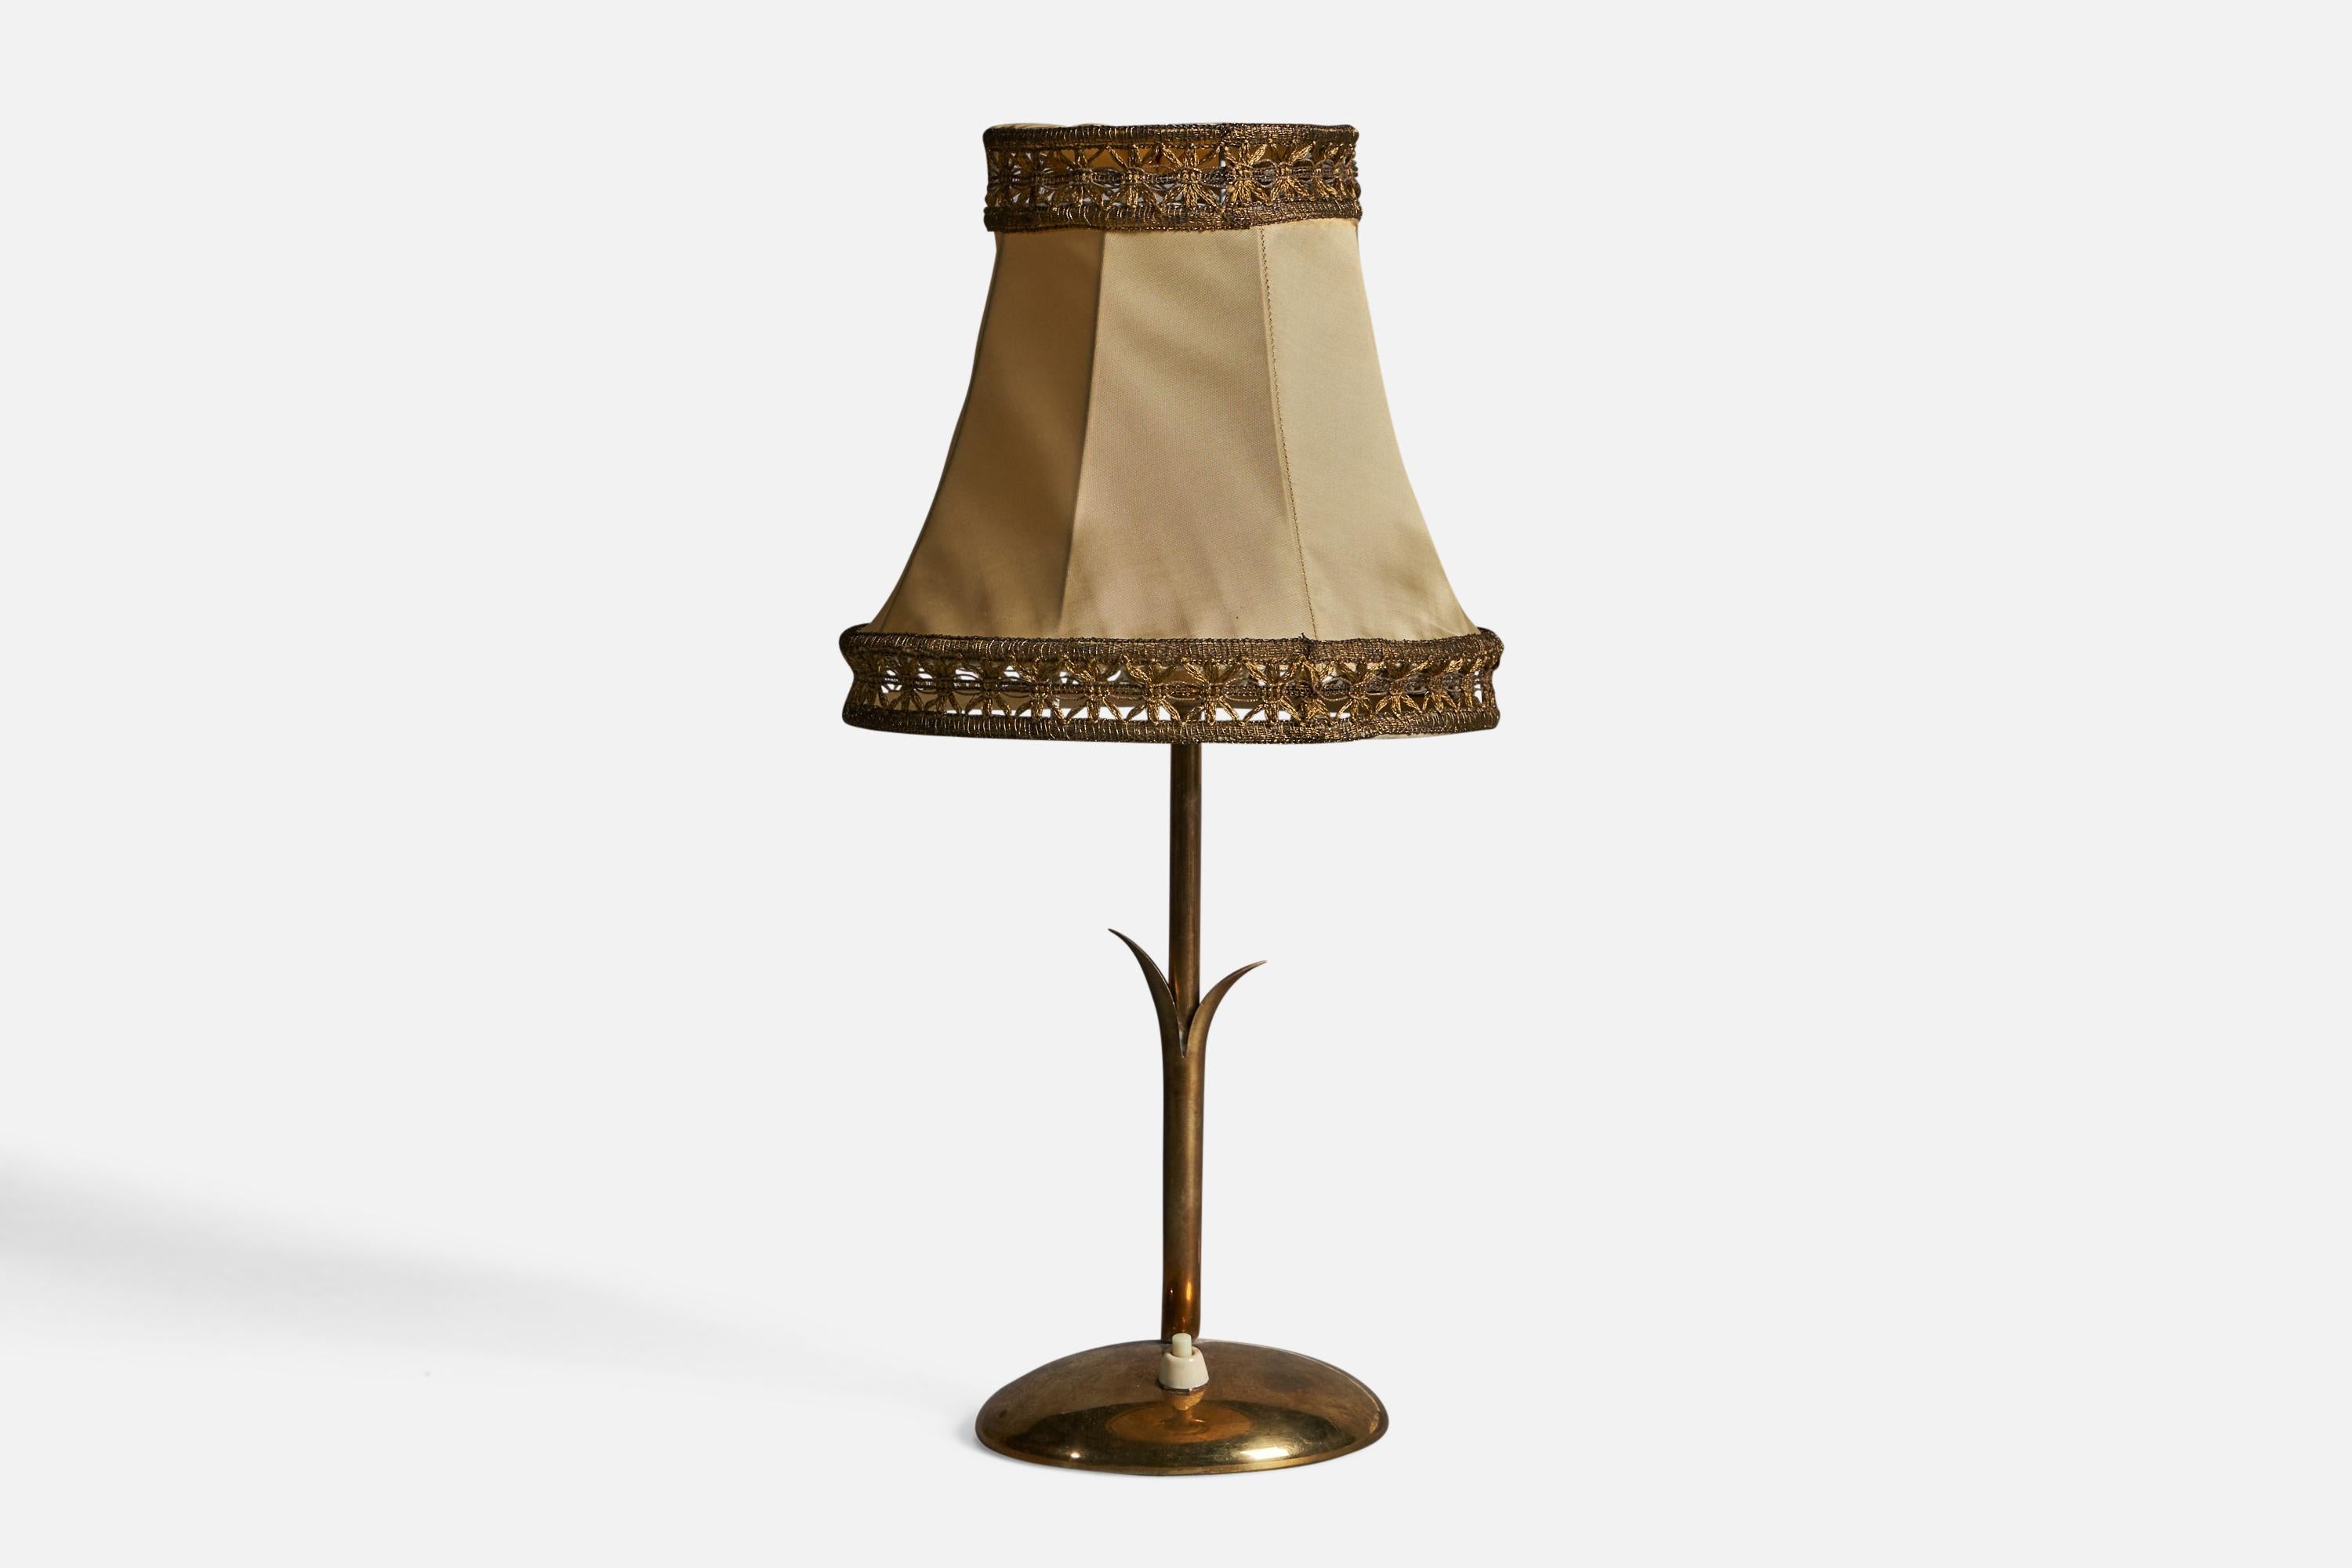 A brass and beige fabric table lamp designed and produced in Finland, 1940s.

Overall Dimensions (inches): 16.25